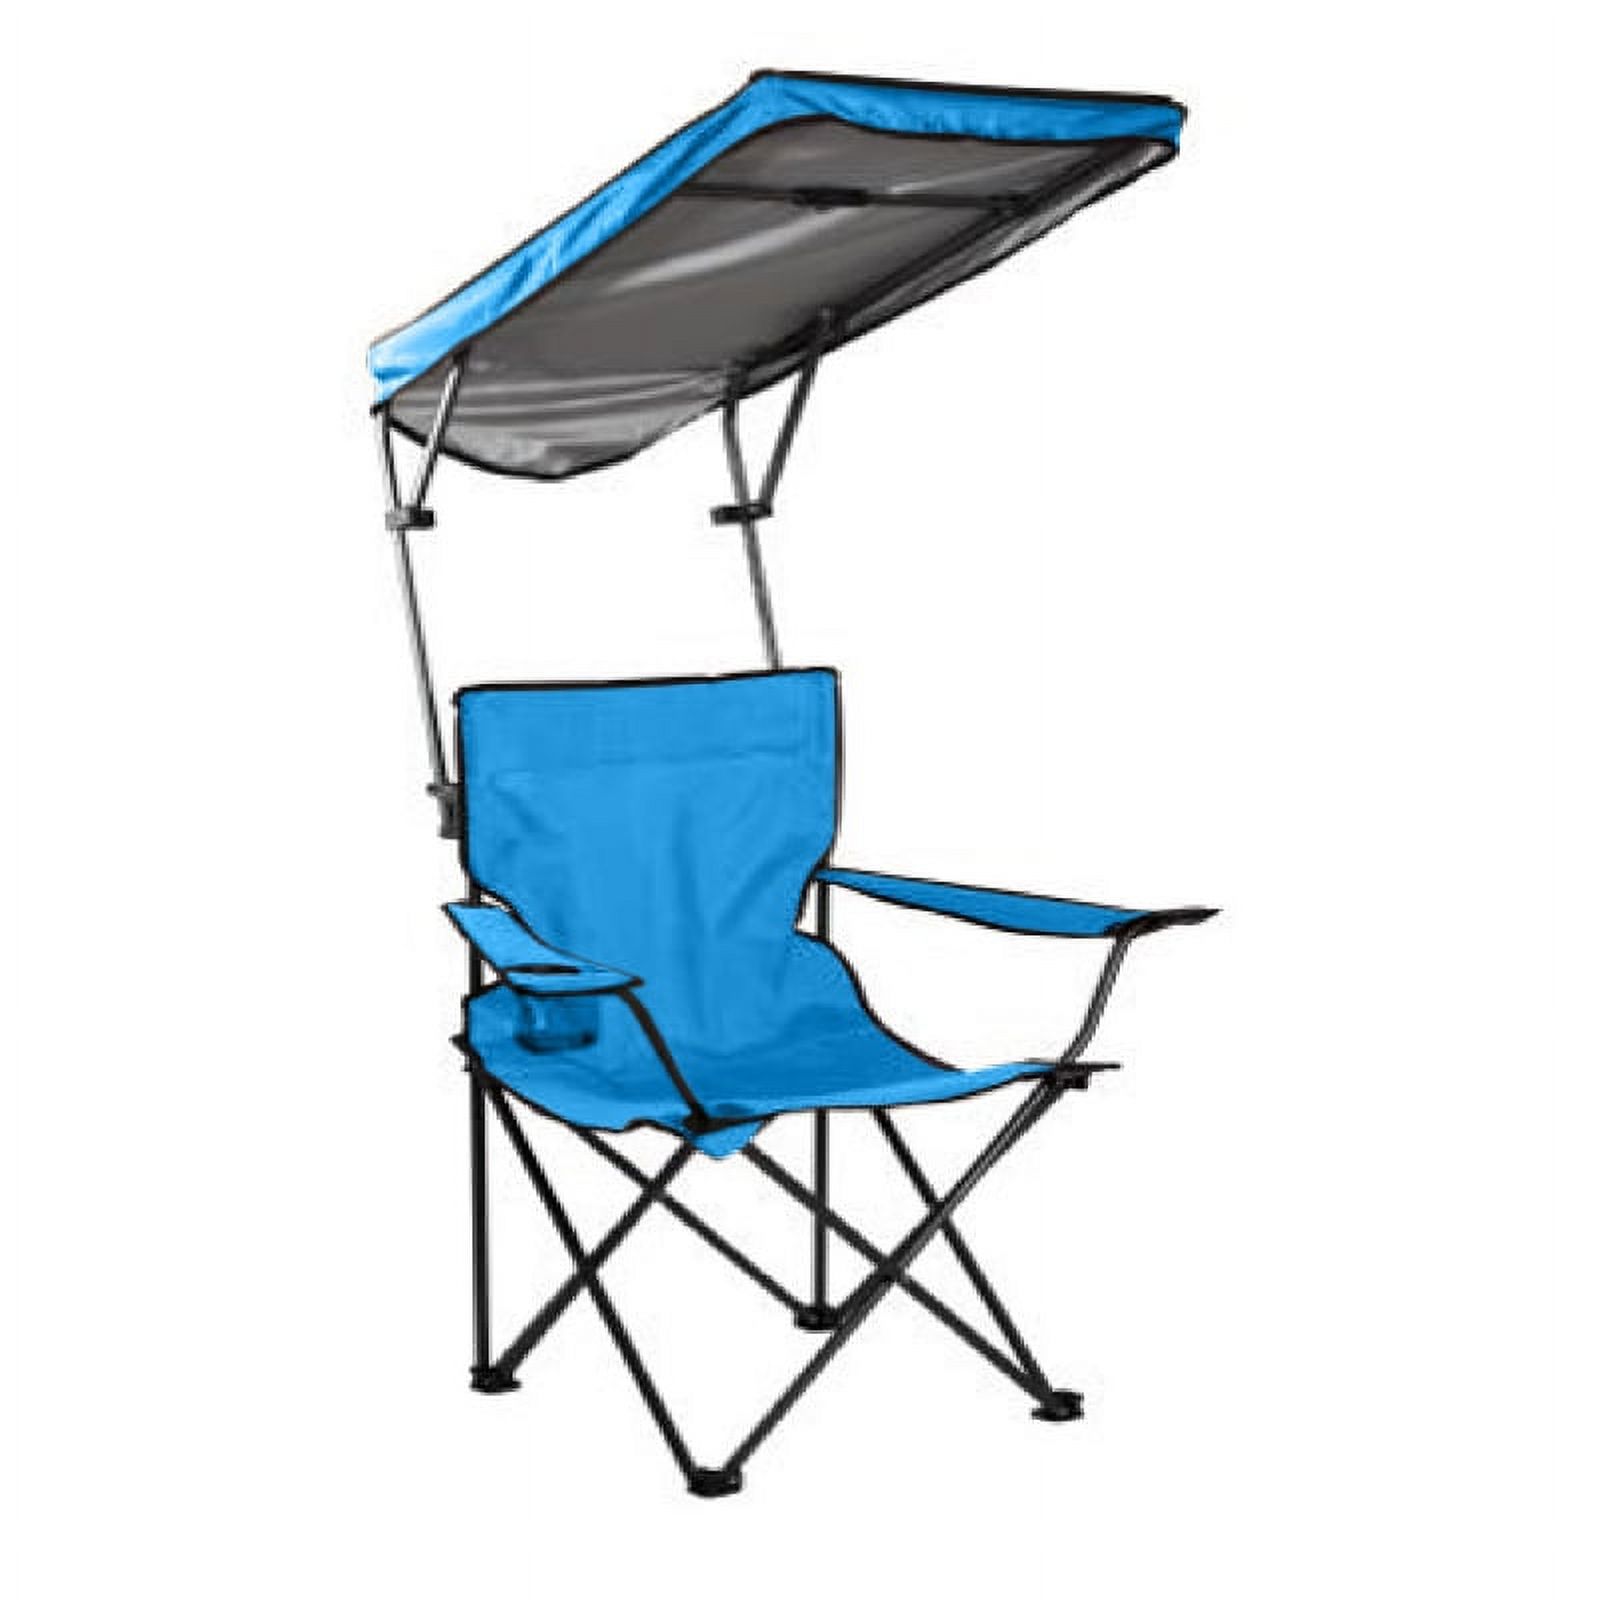 Quik Shade Basic Adjustable Blue Canopy Chair - image 1 of 4